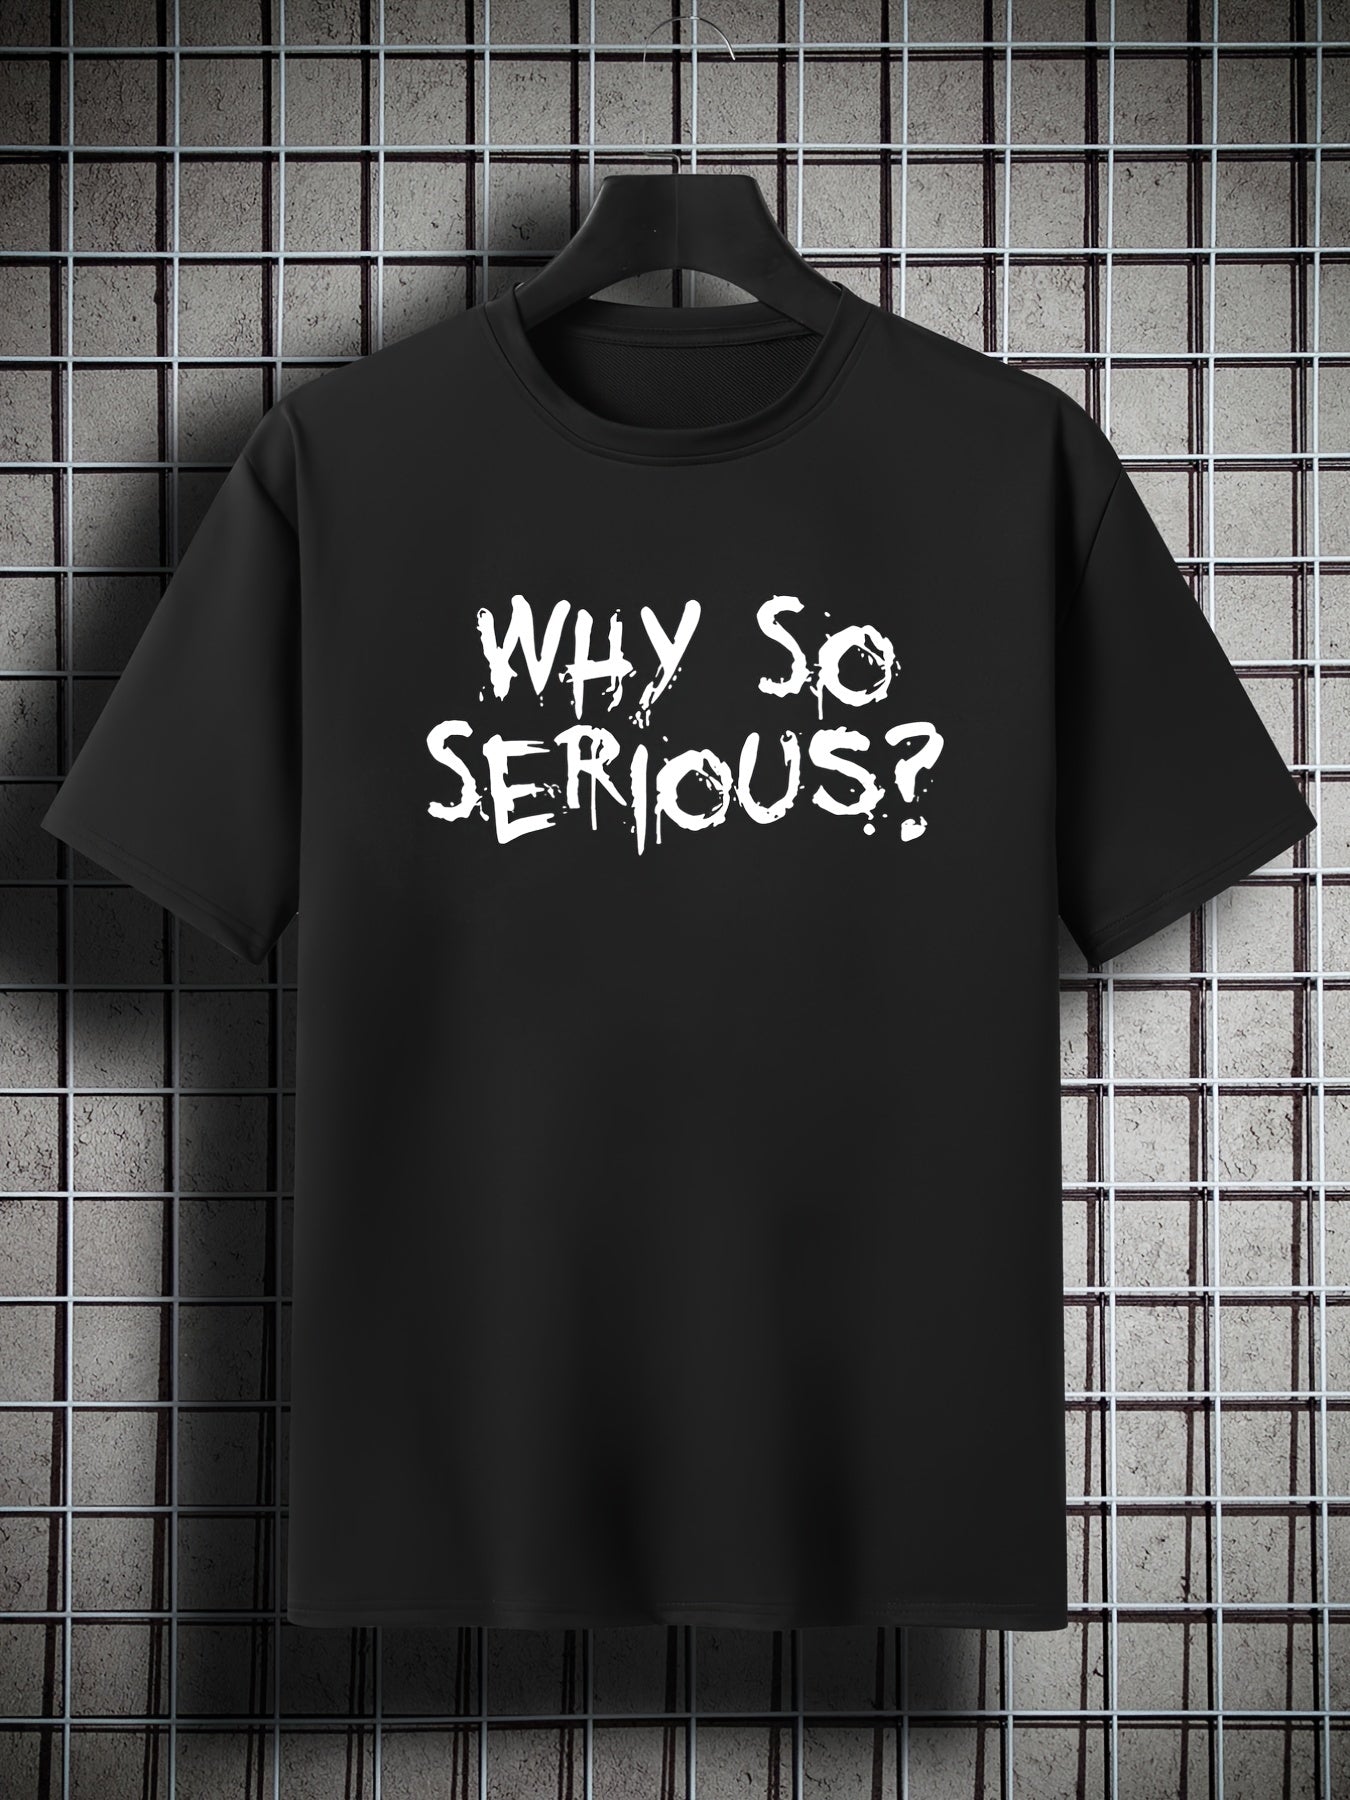 "Why So Serious?" Plus Size Graphic Tee: Big Style for Big Personalities! 🃏 - Rexpect Nerd